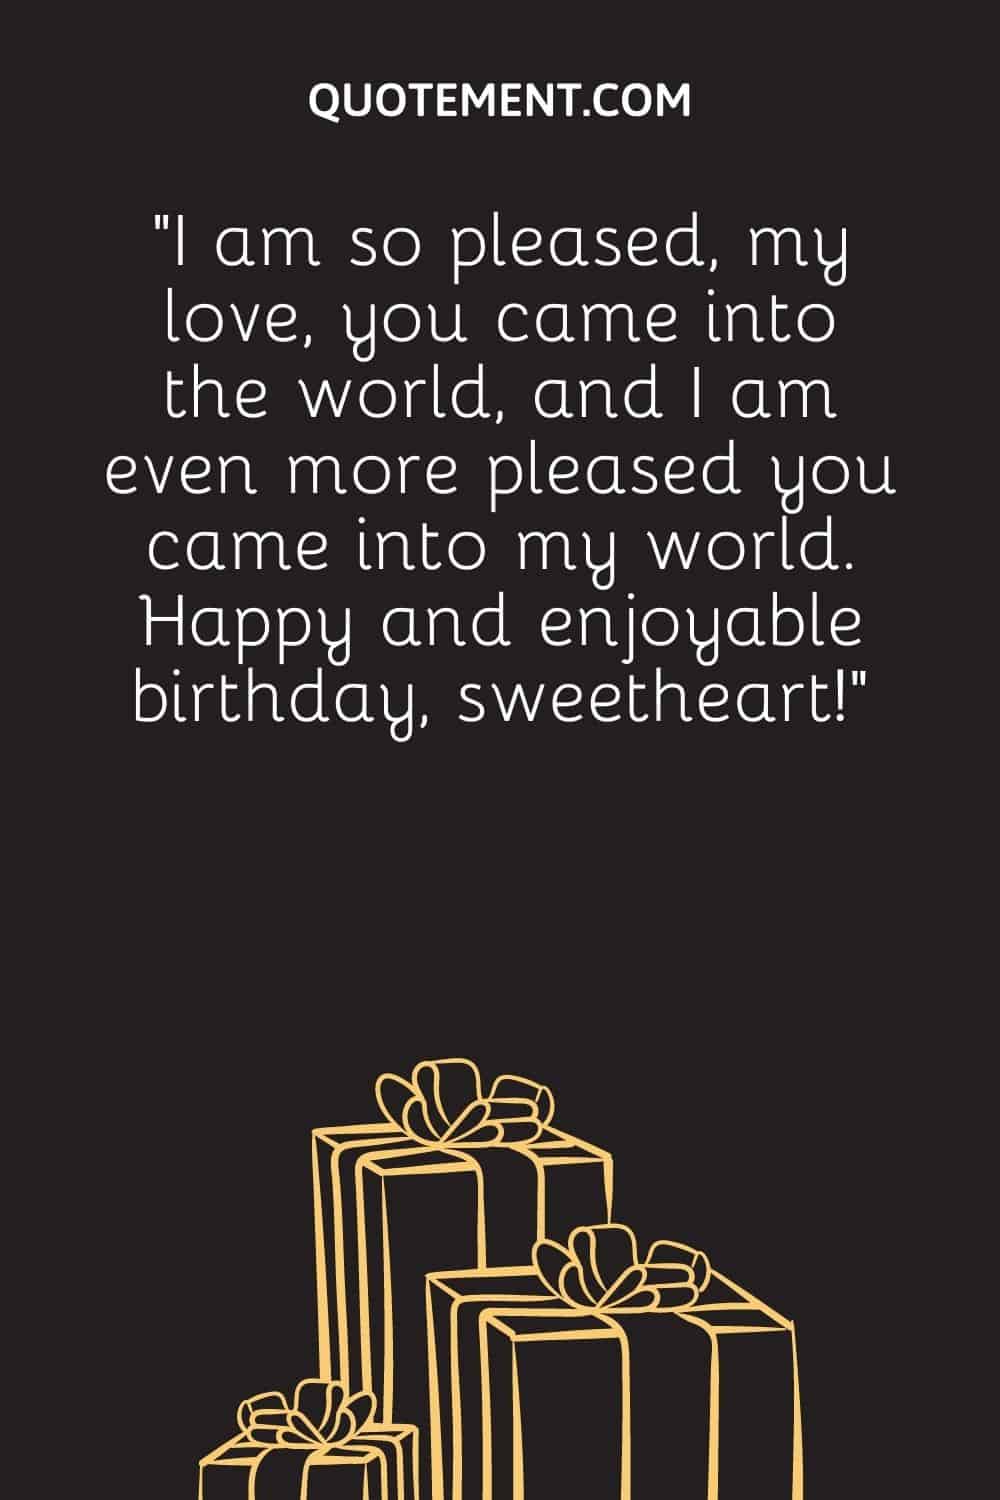 “I am so pleased, my love, you came into the world, and I am even more pleased you came into my world. Happy and enjoyable birthday, sweetheart!”